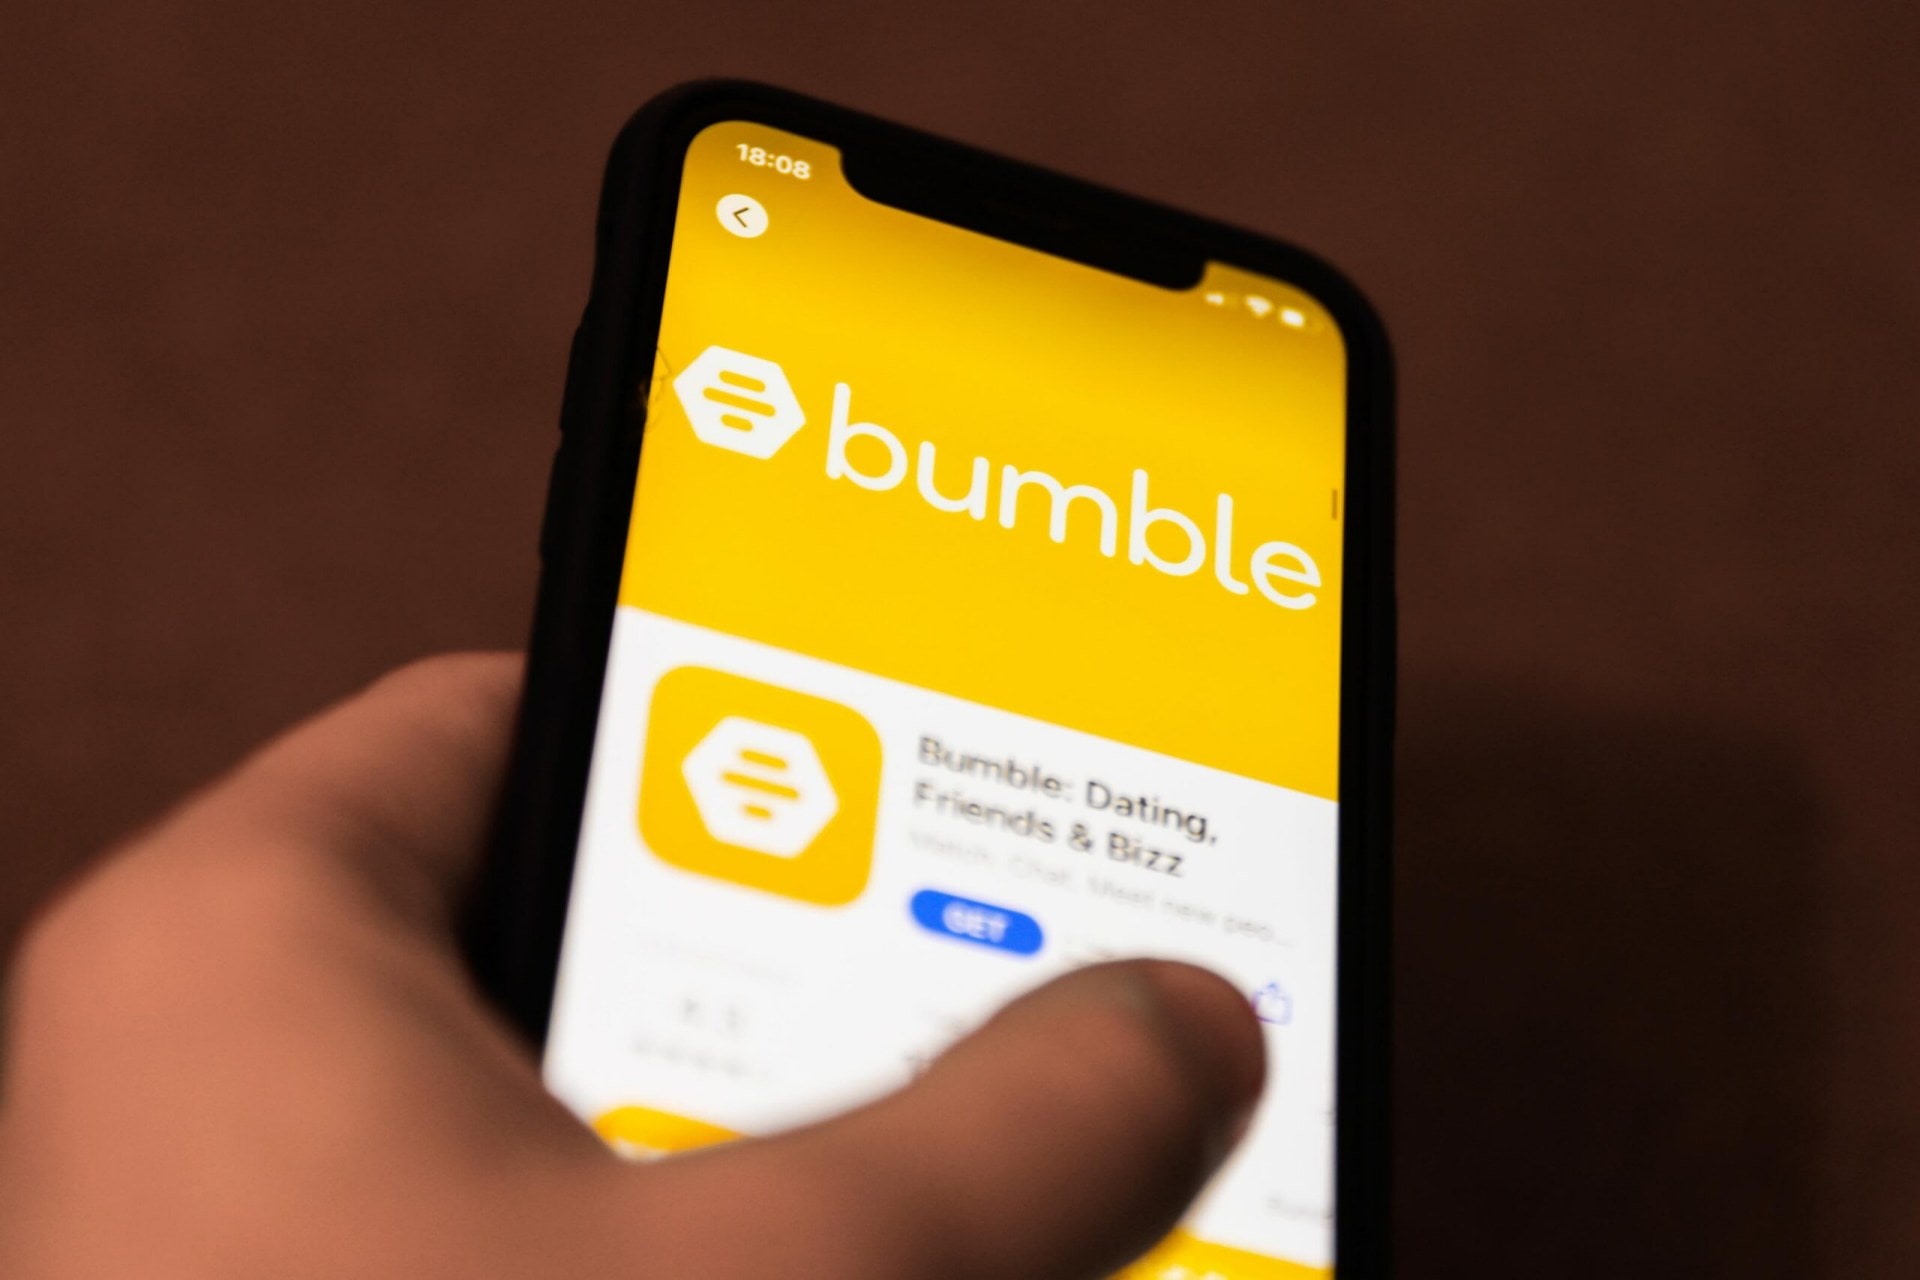 A close up of a hand holding a mobile phone which has the Bumble app open